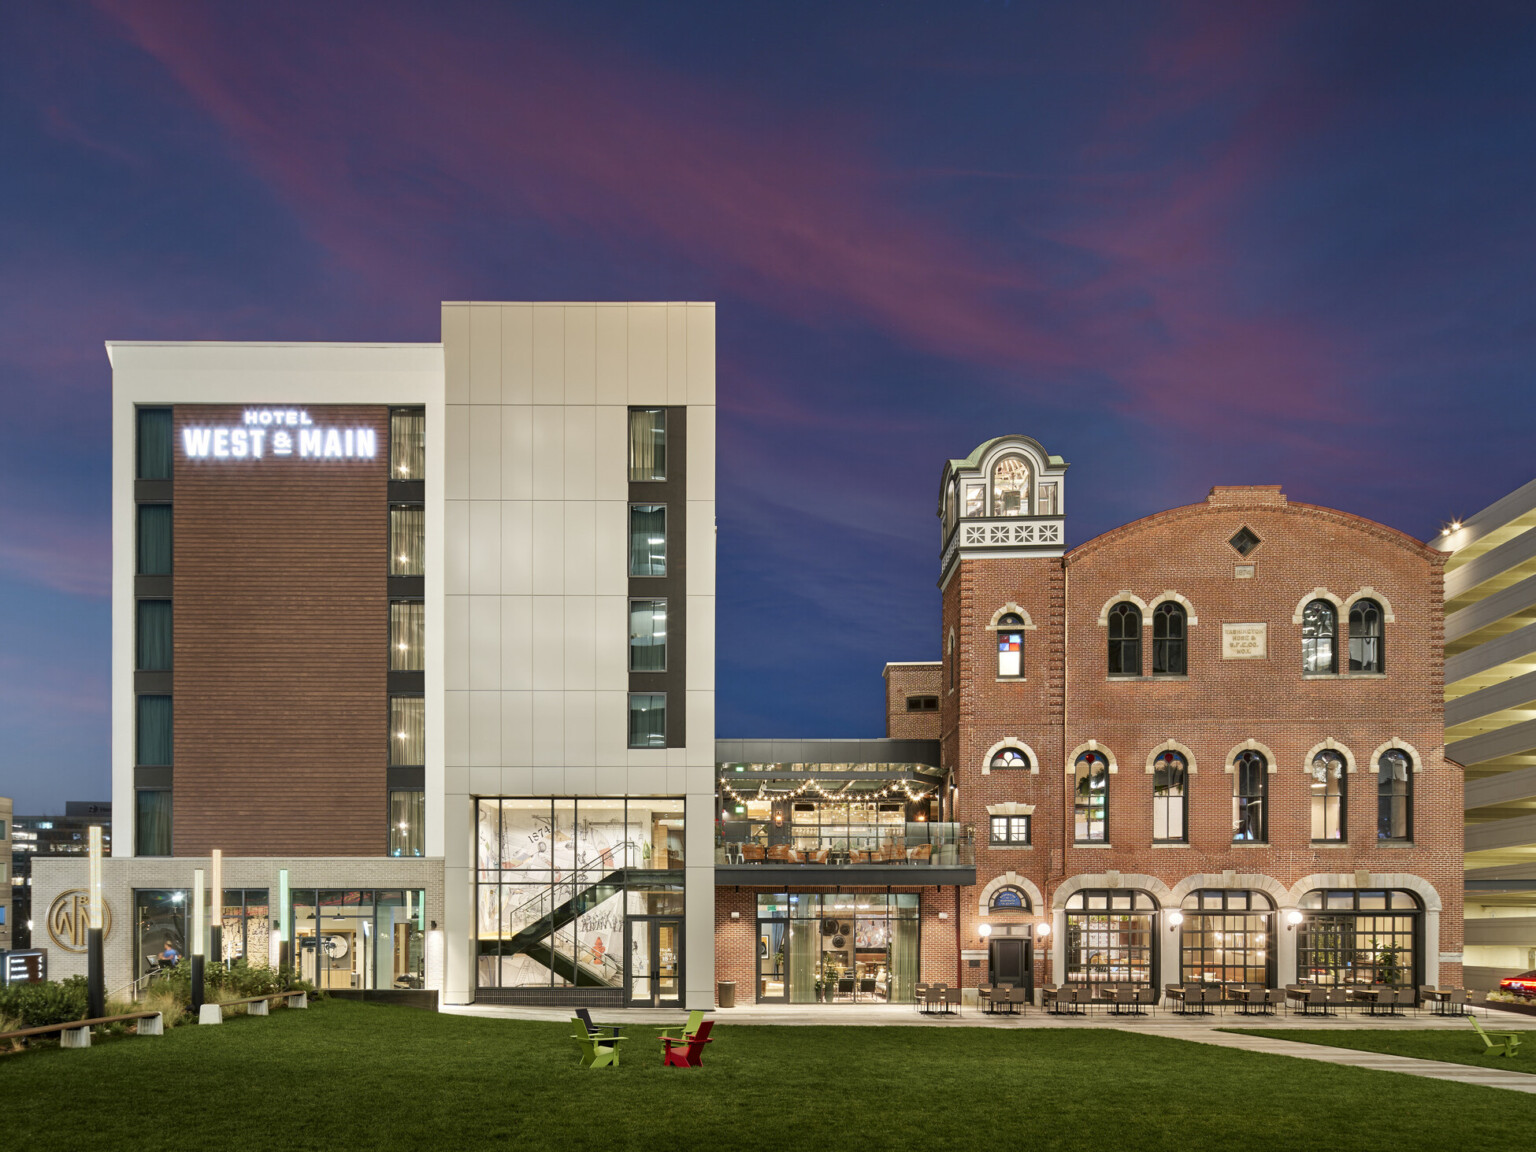 On the left, a new multi-story hotel wrapped in light siding with brick accents and on the right, the former brick fire station connects to the new hotel by an enclosed structure with a rooftop balcony overlooking a lawn